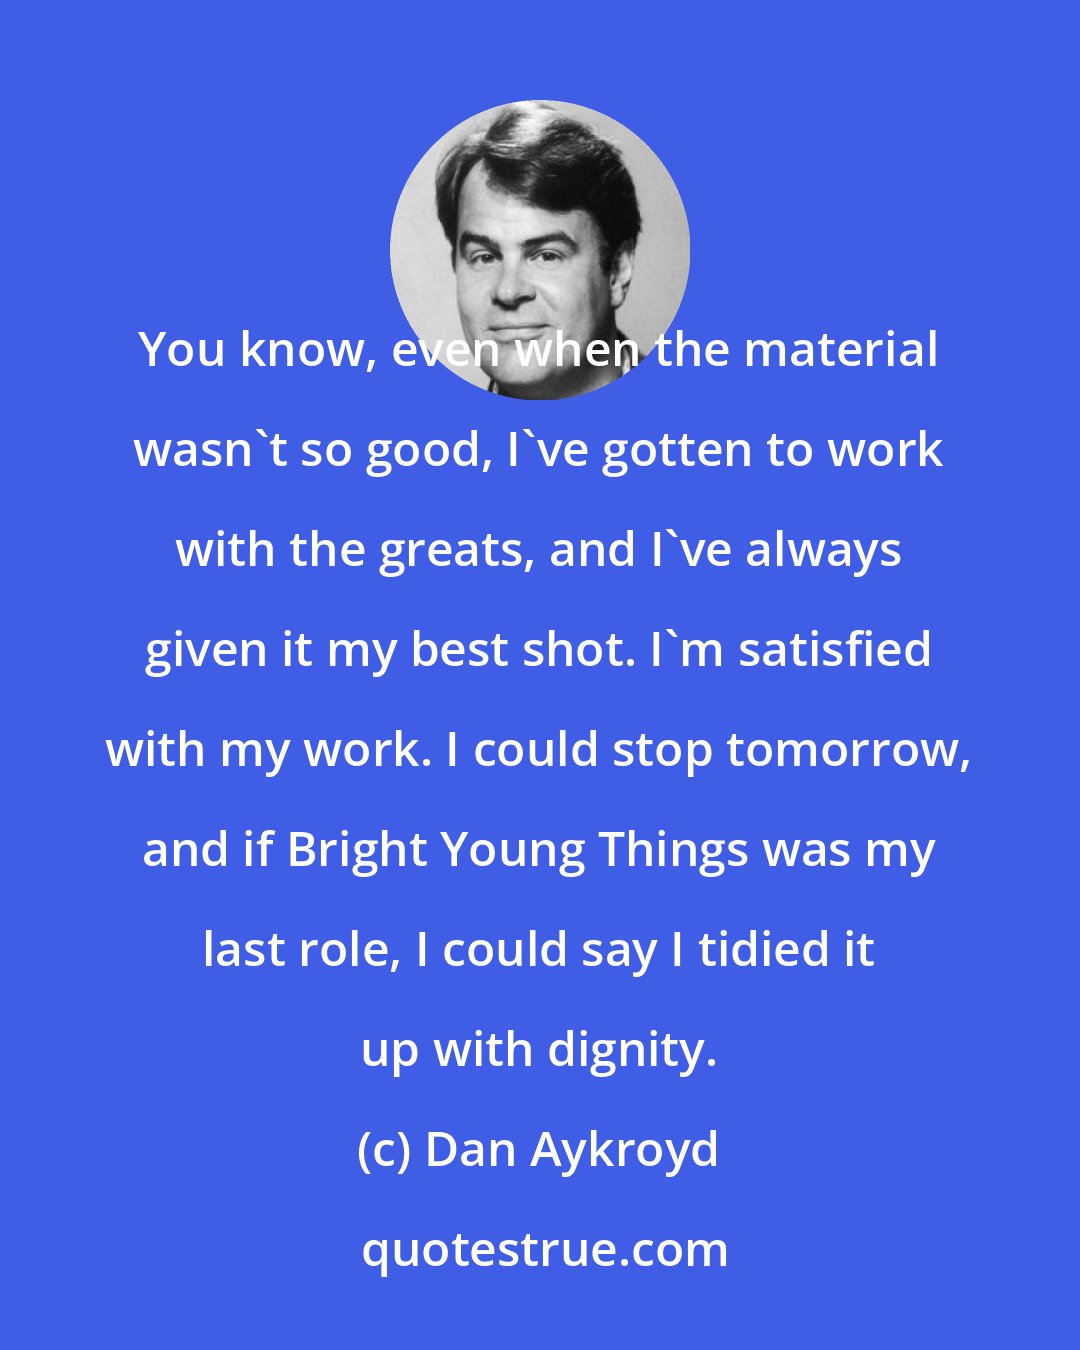 Dan Aykroyd: You know, even when the material wasn't so good, I've gotten to work with the greats, and I've always given it my best shot. I'm satisfied with my work. I could stop tomorrow, and if Bright Young Things was my last role, I could say I tidied it up with dignity.